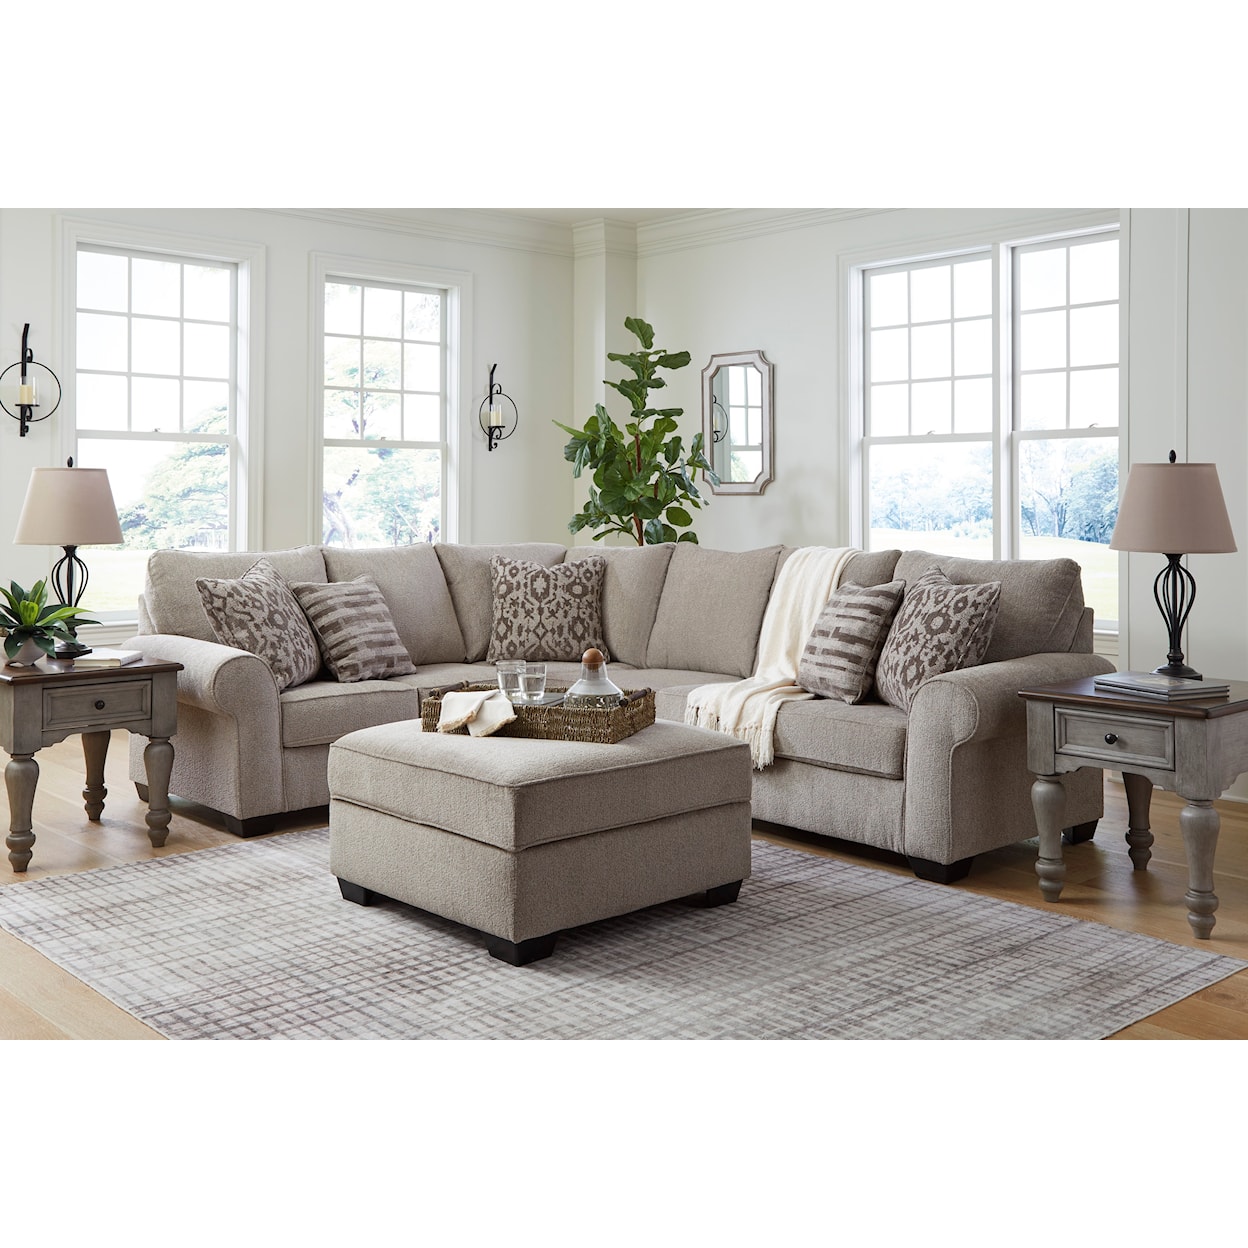 Signature Design by Ashley Furniture Claireah Casual Living Room Set